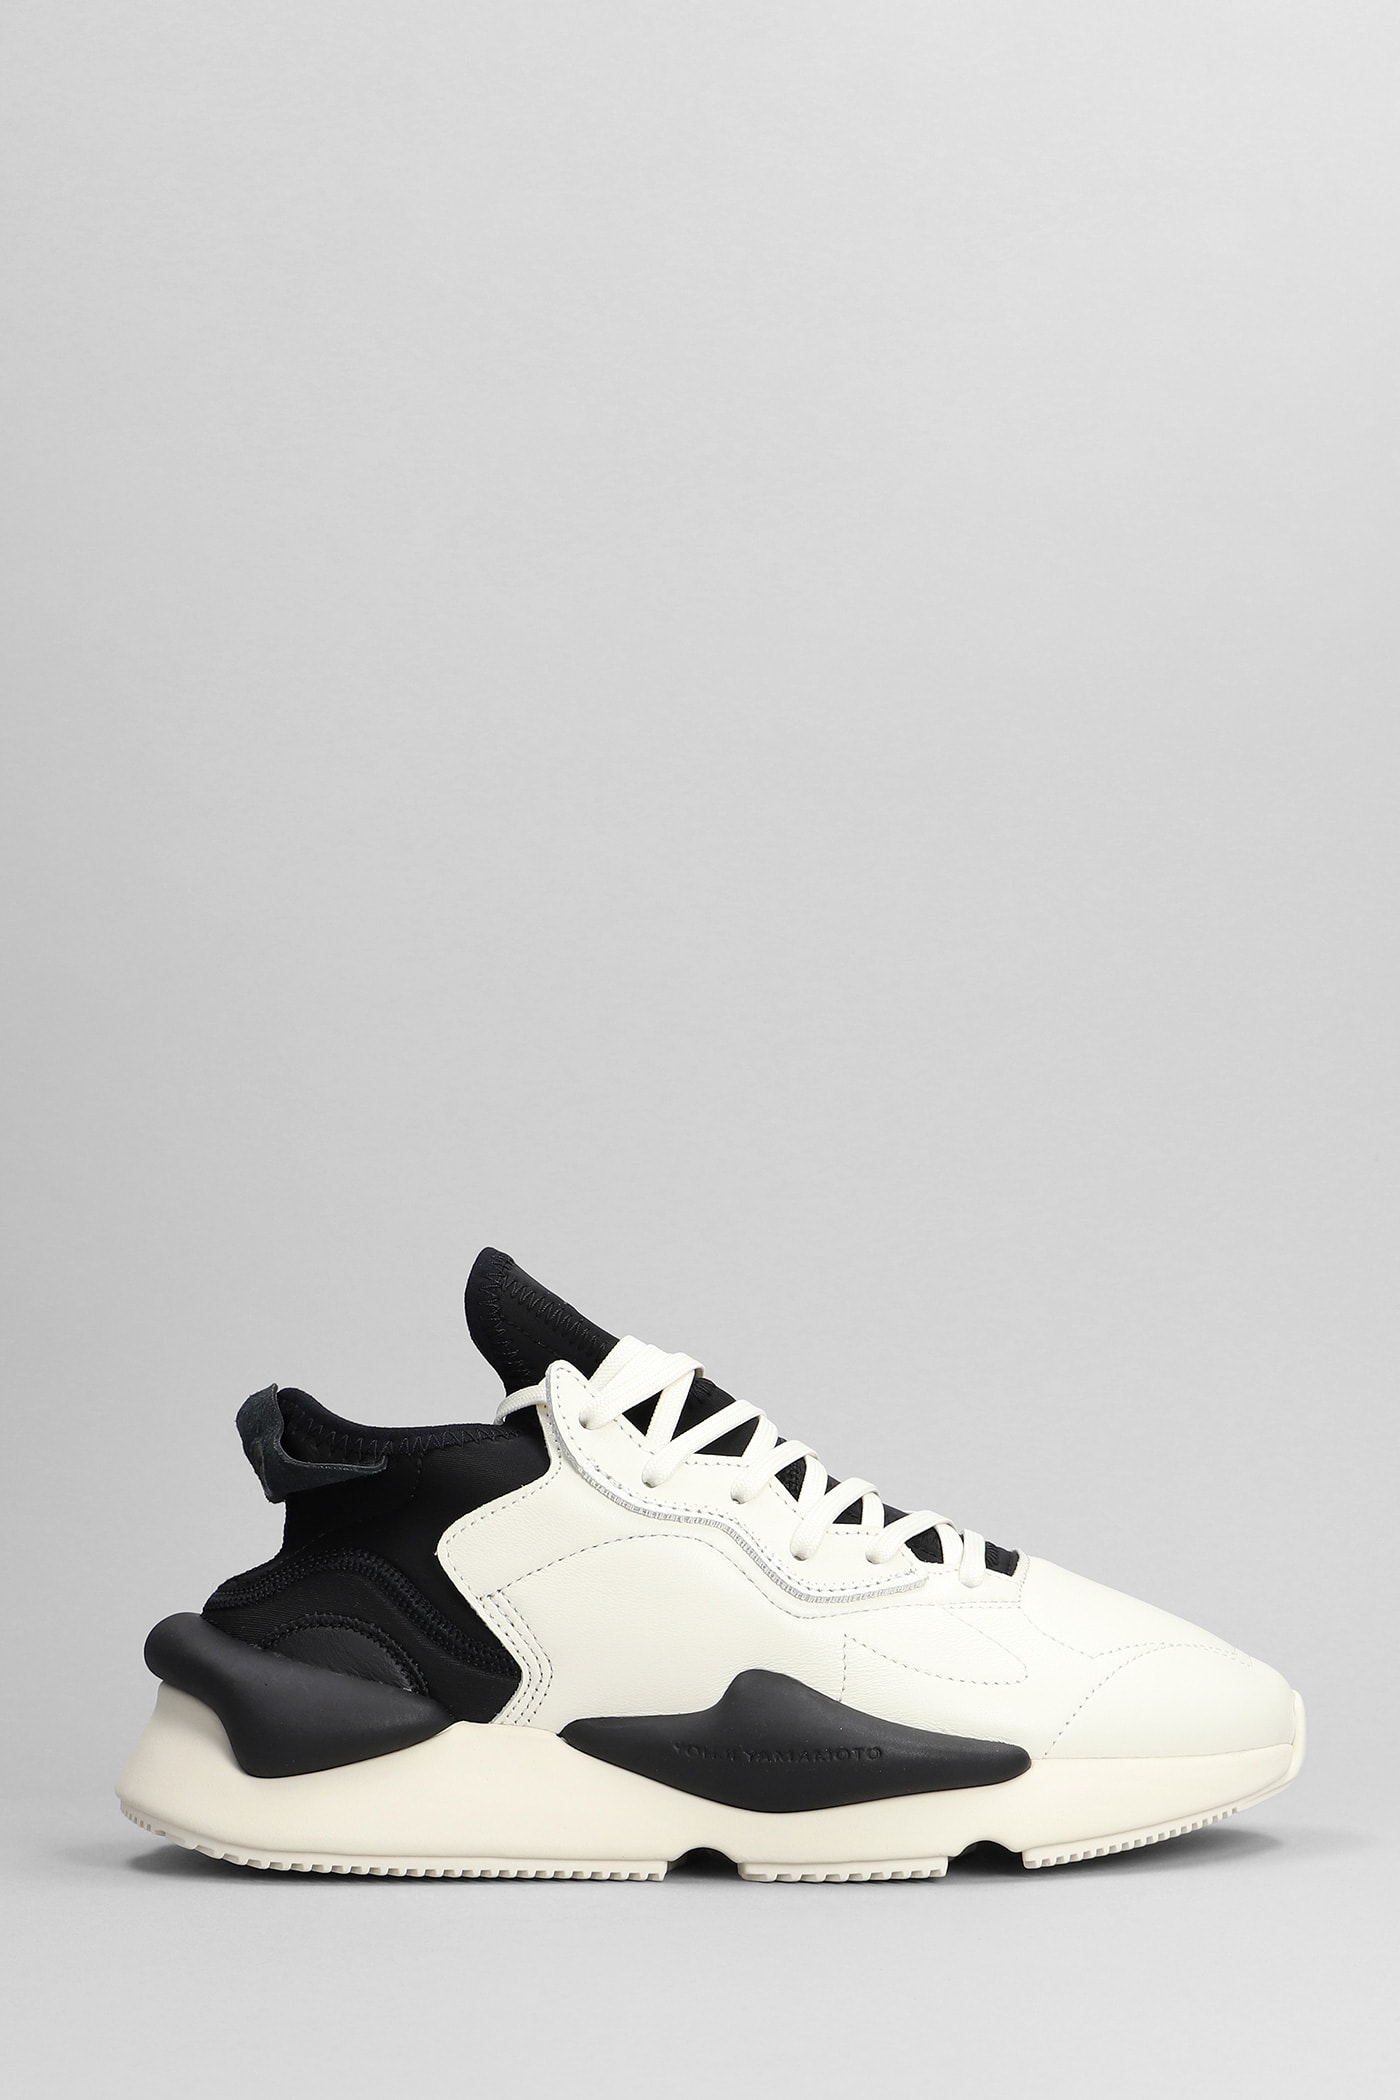 Kaiwa Sneakers In White Leather